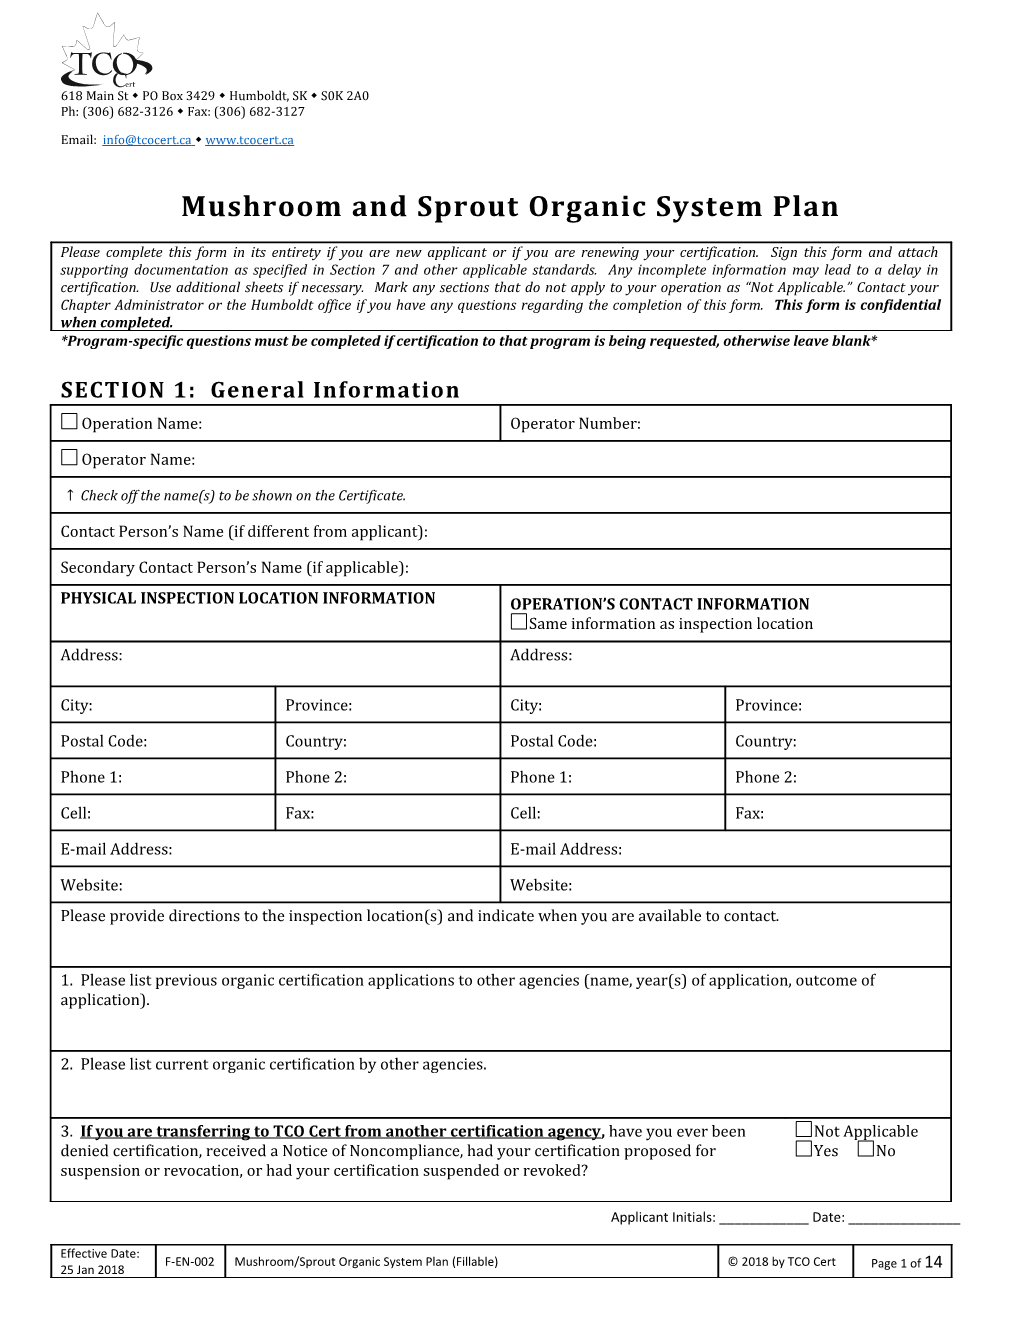 Mushroom and Sprout Organic System Plan